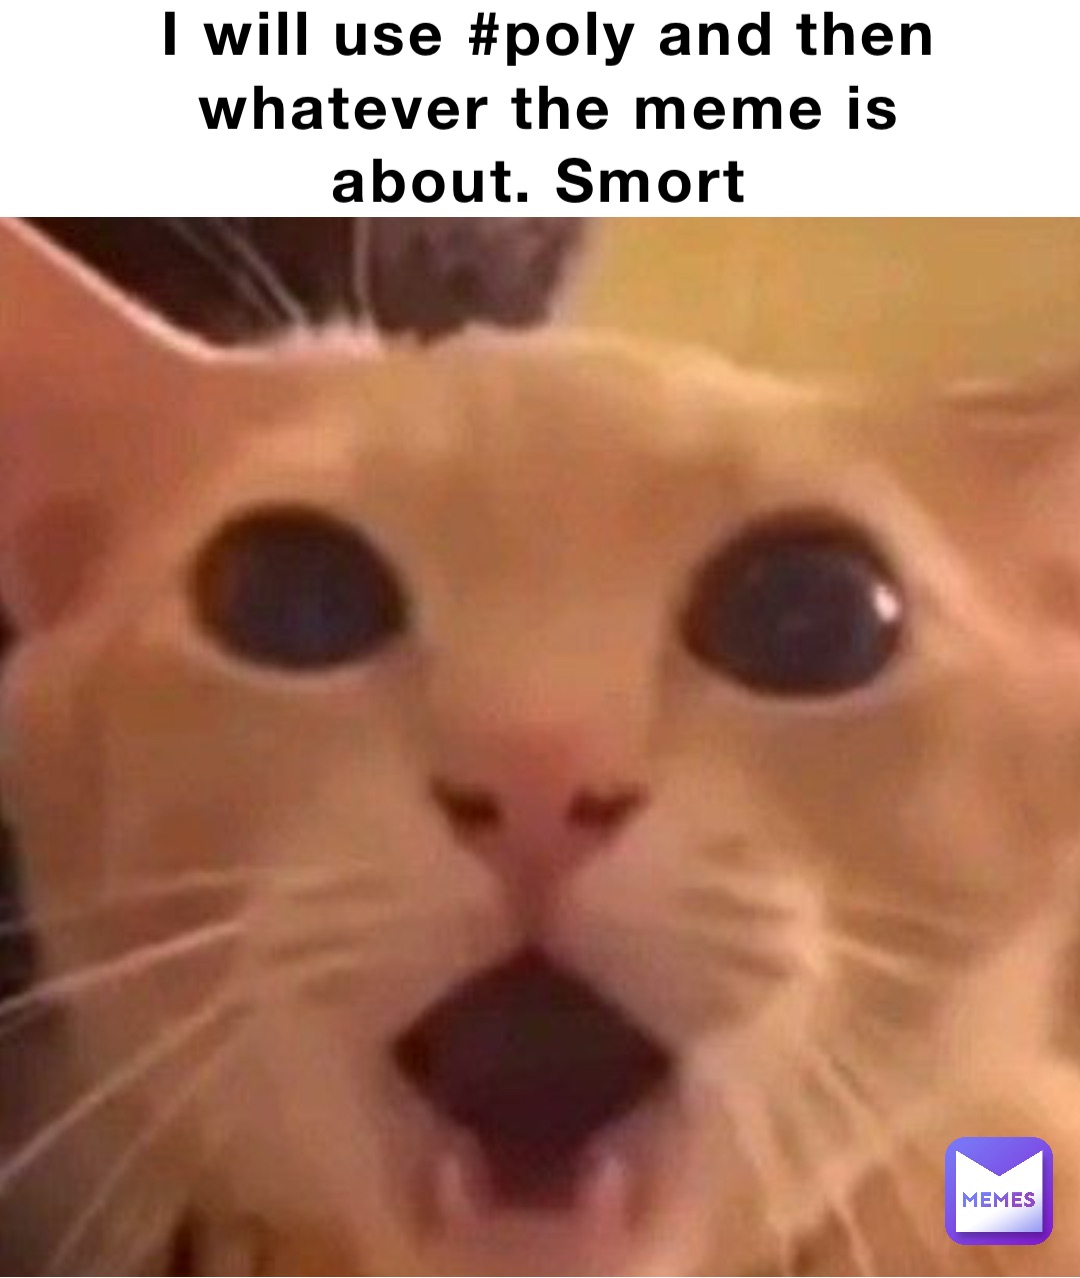 I will use #poly and then whatever the meme is about. Smort